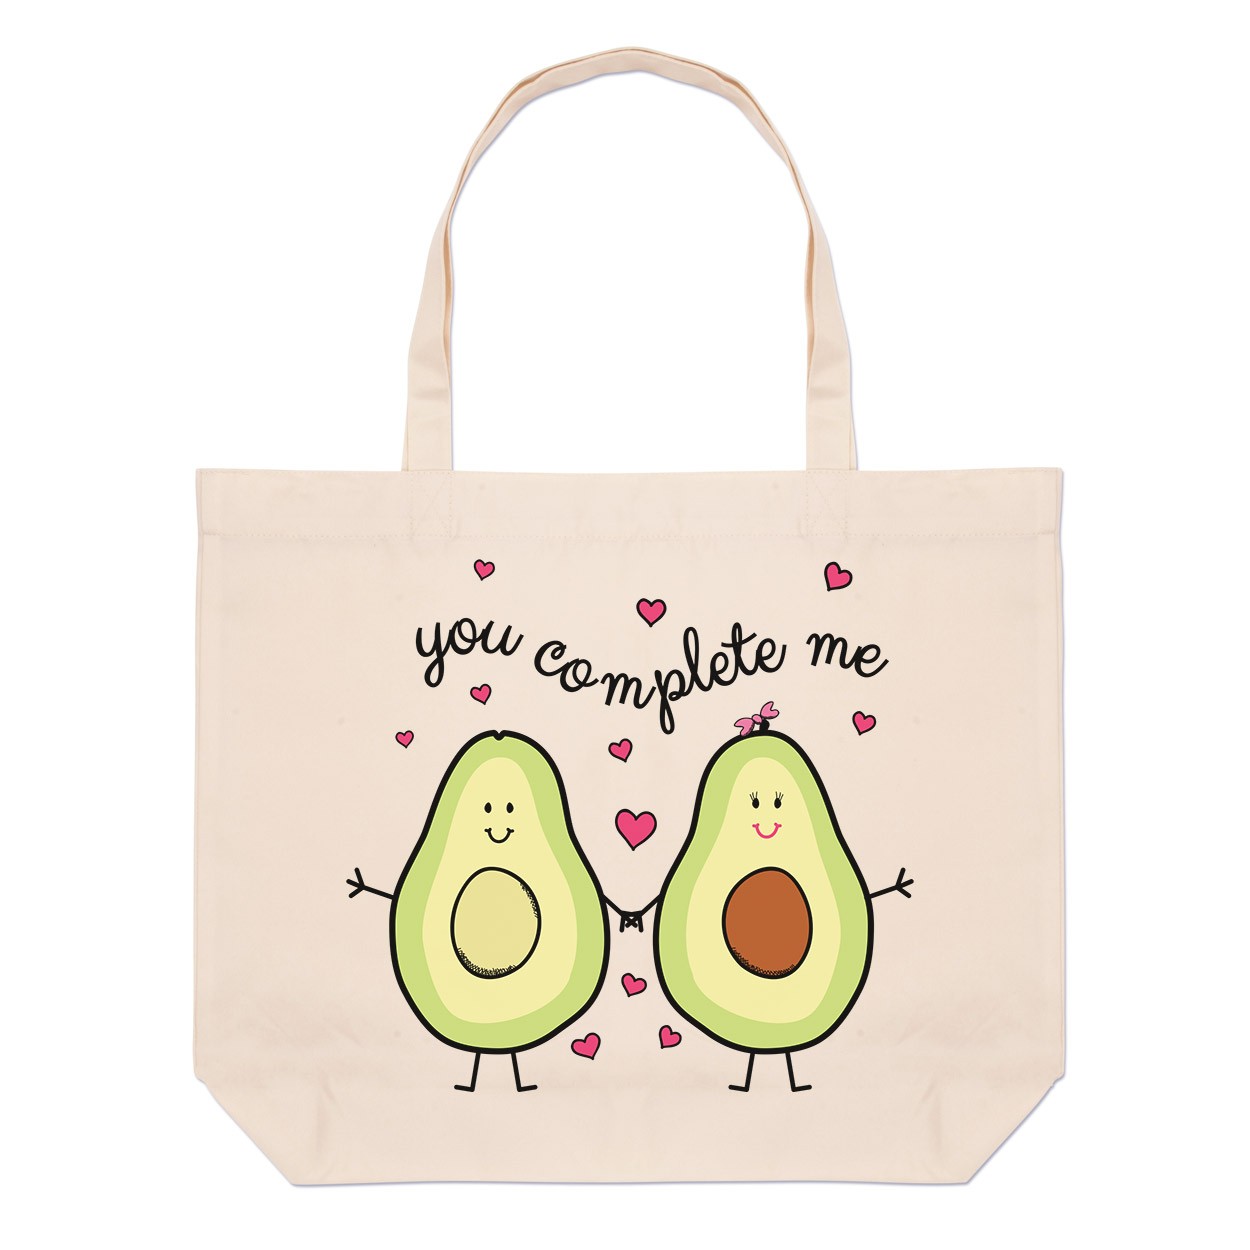 Avocado You Complete Me Large Beach Tote Bag